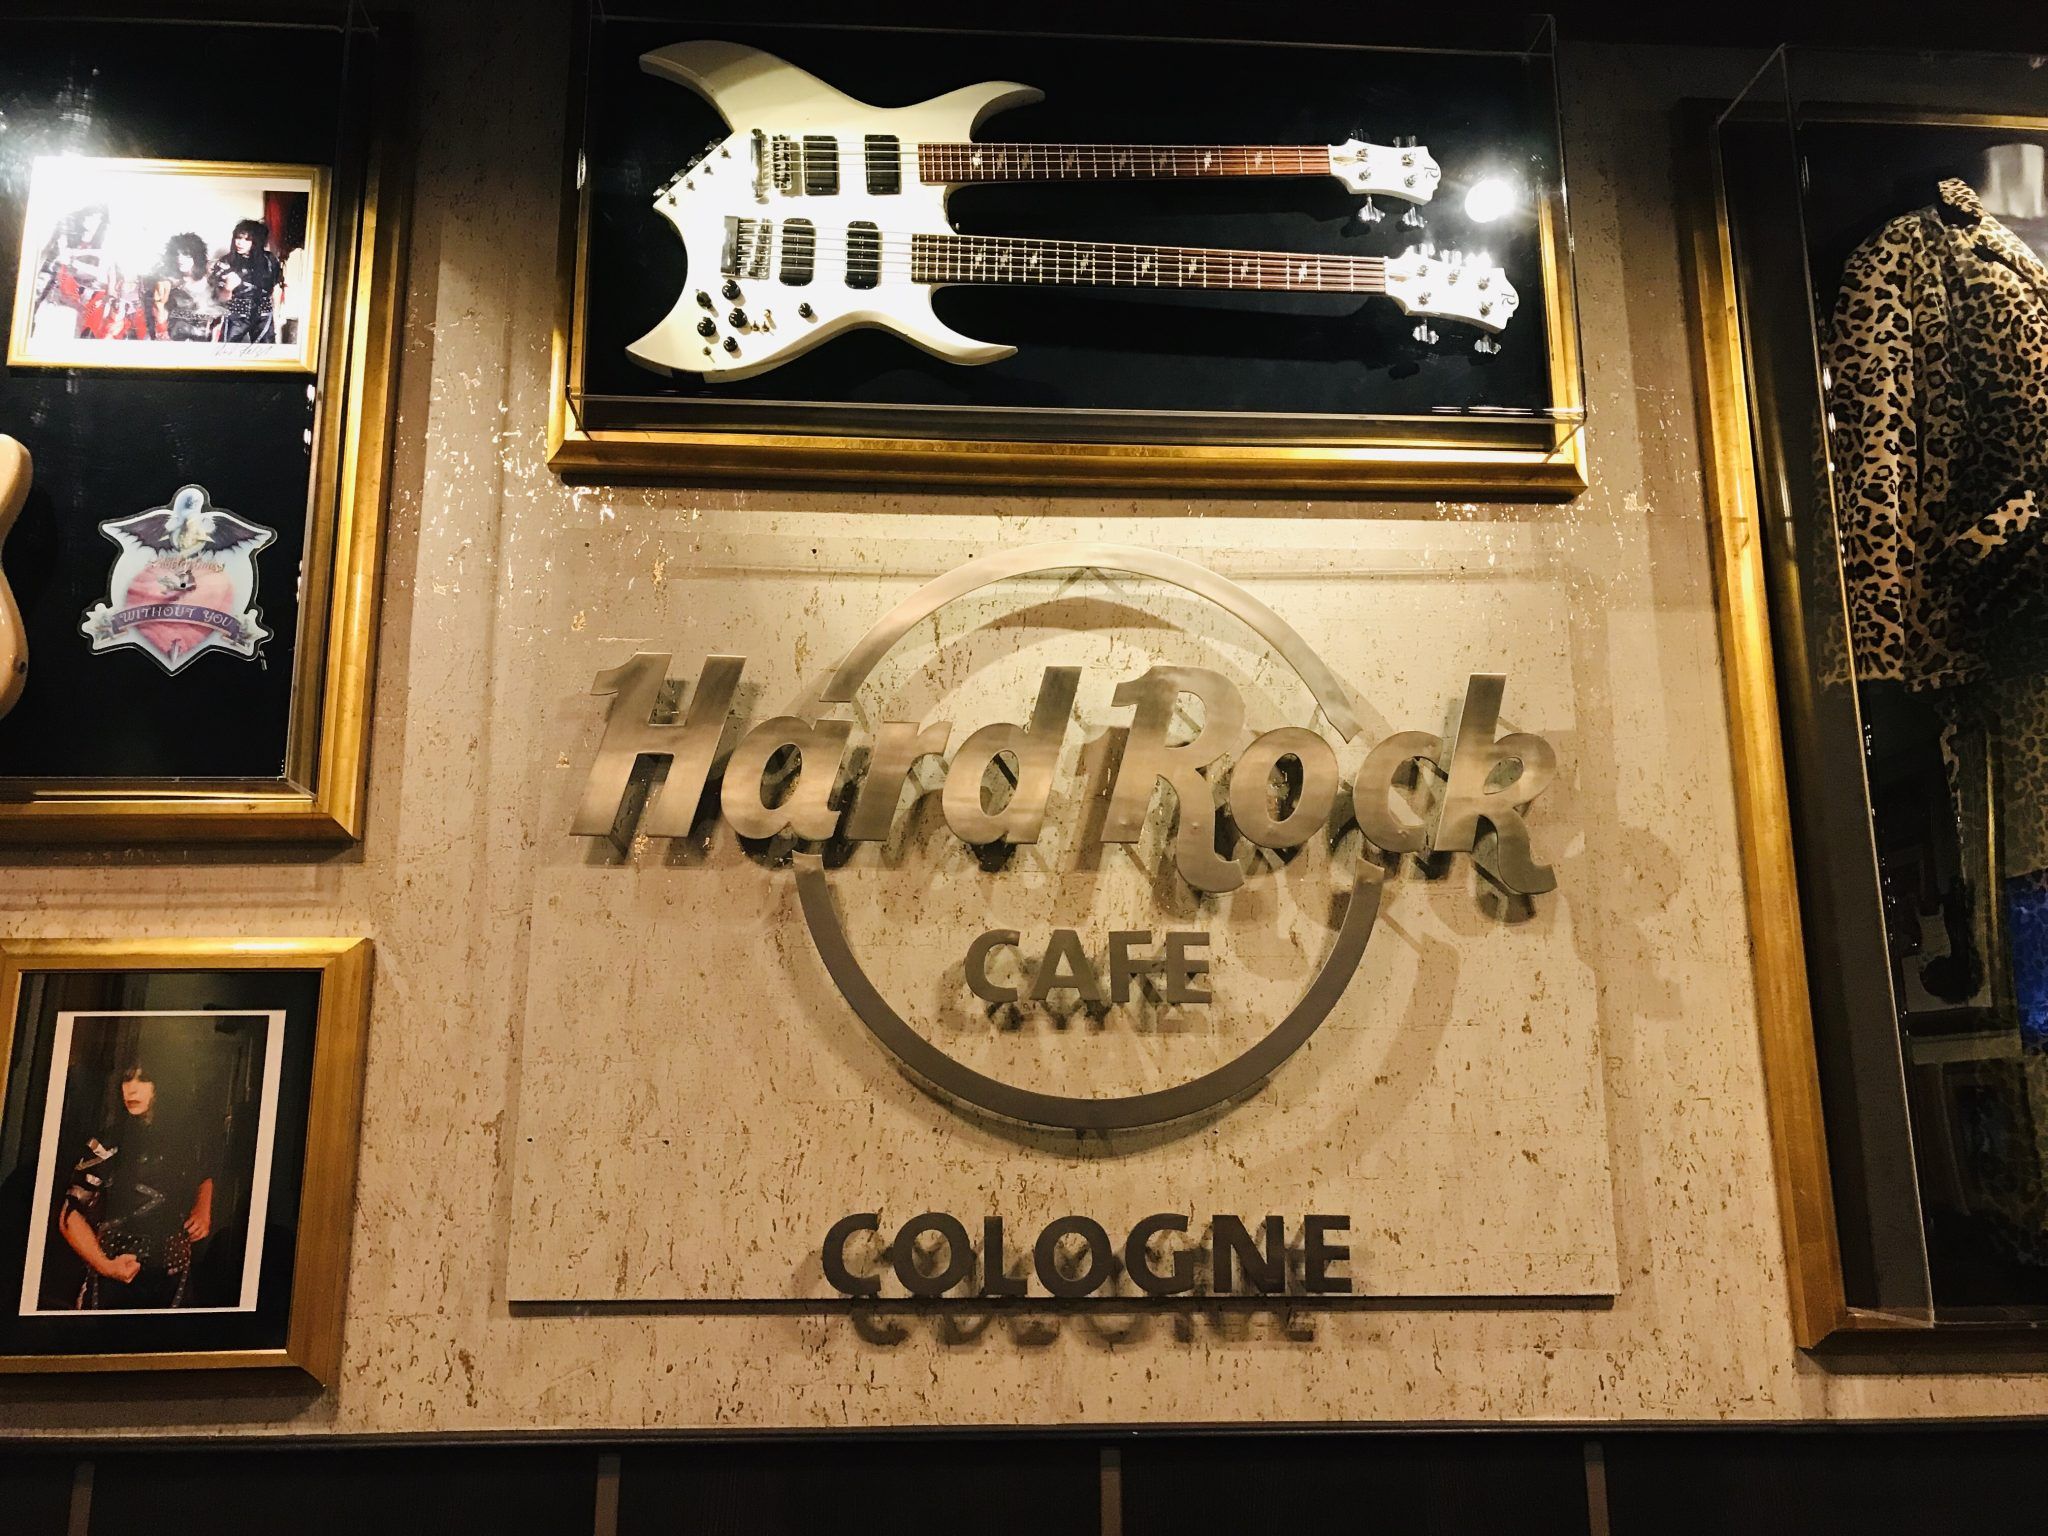 Hard Rock Cafe Cologne taste of Rock and Roll on Germany's streets